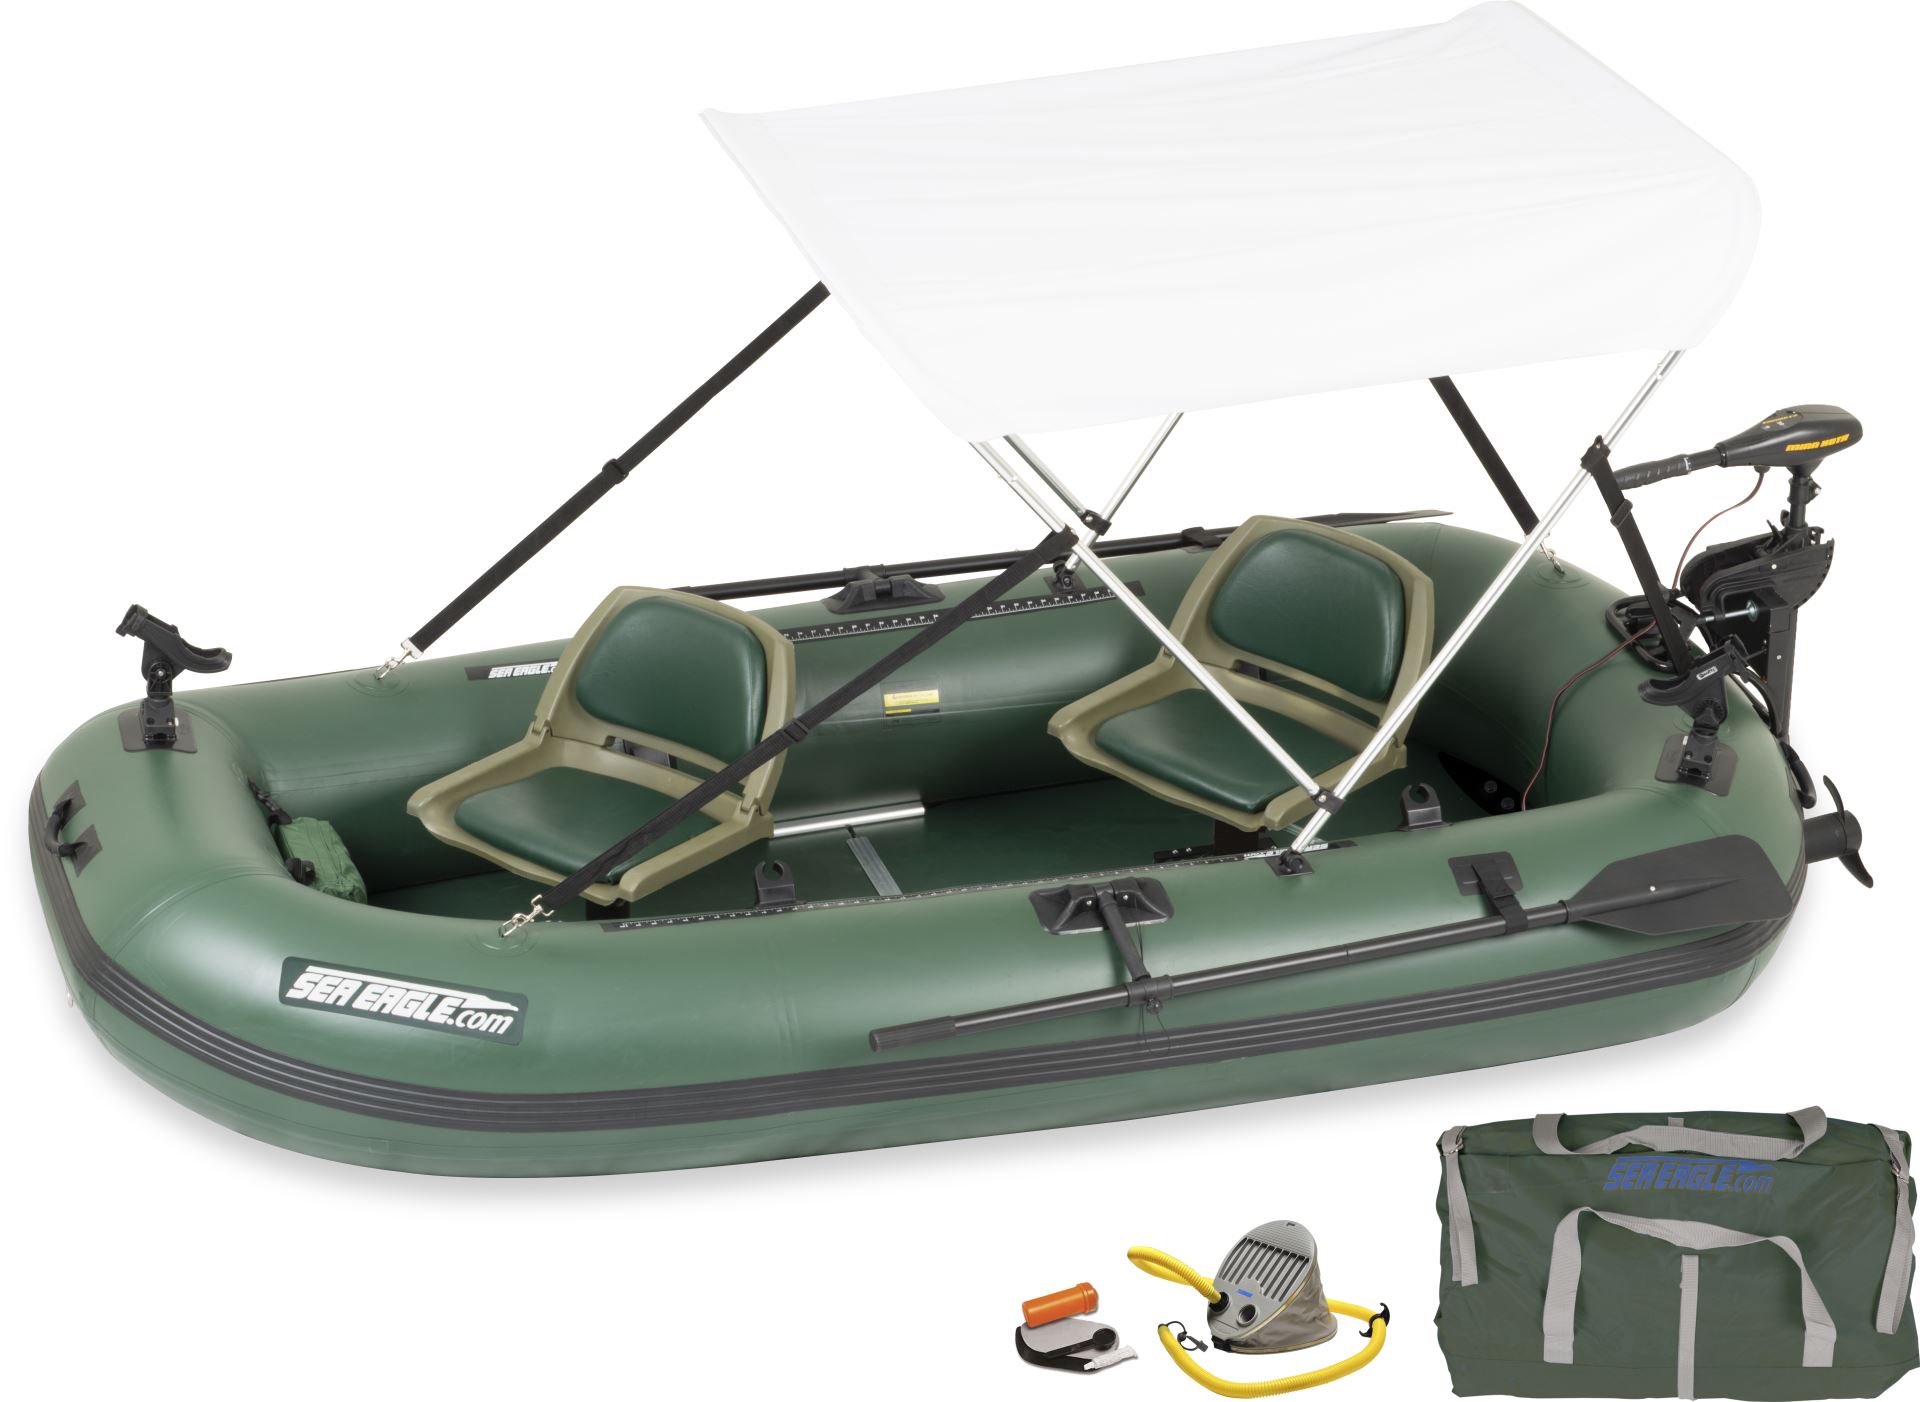 Sea Eagle Sts10 4 Person Inflatable Fishing Boat Package Prices